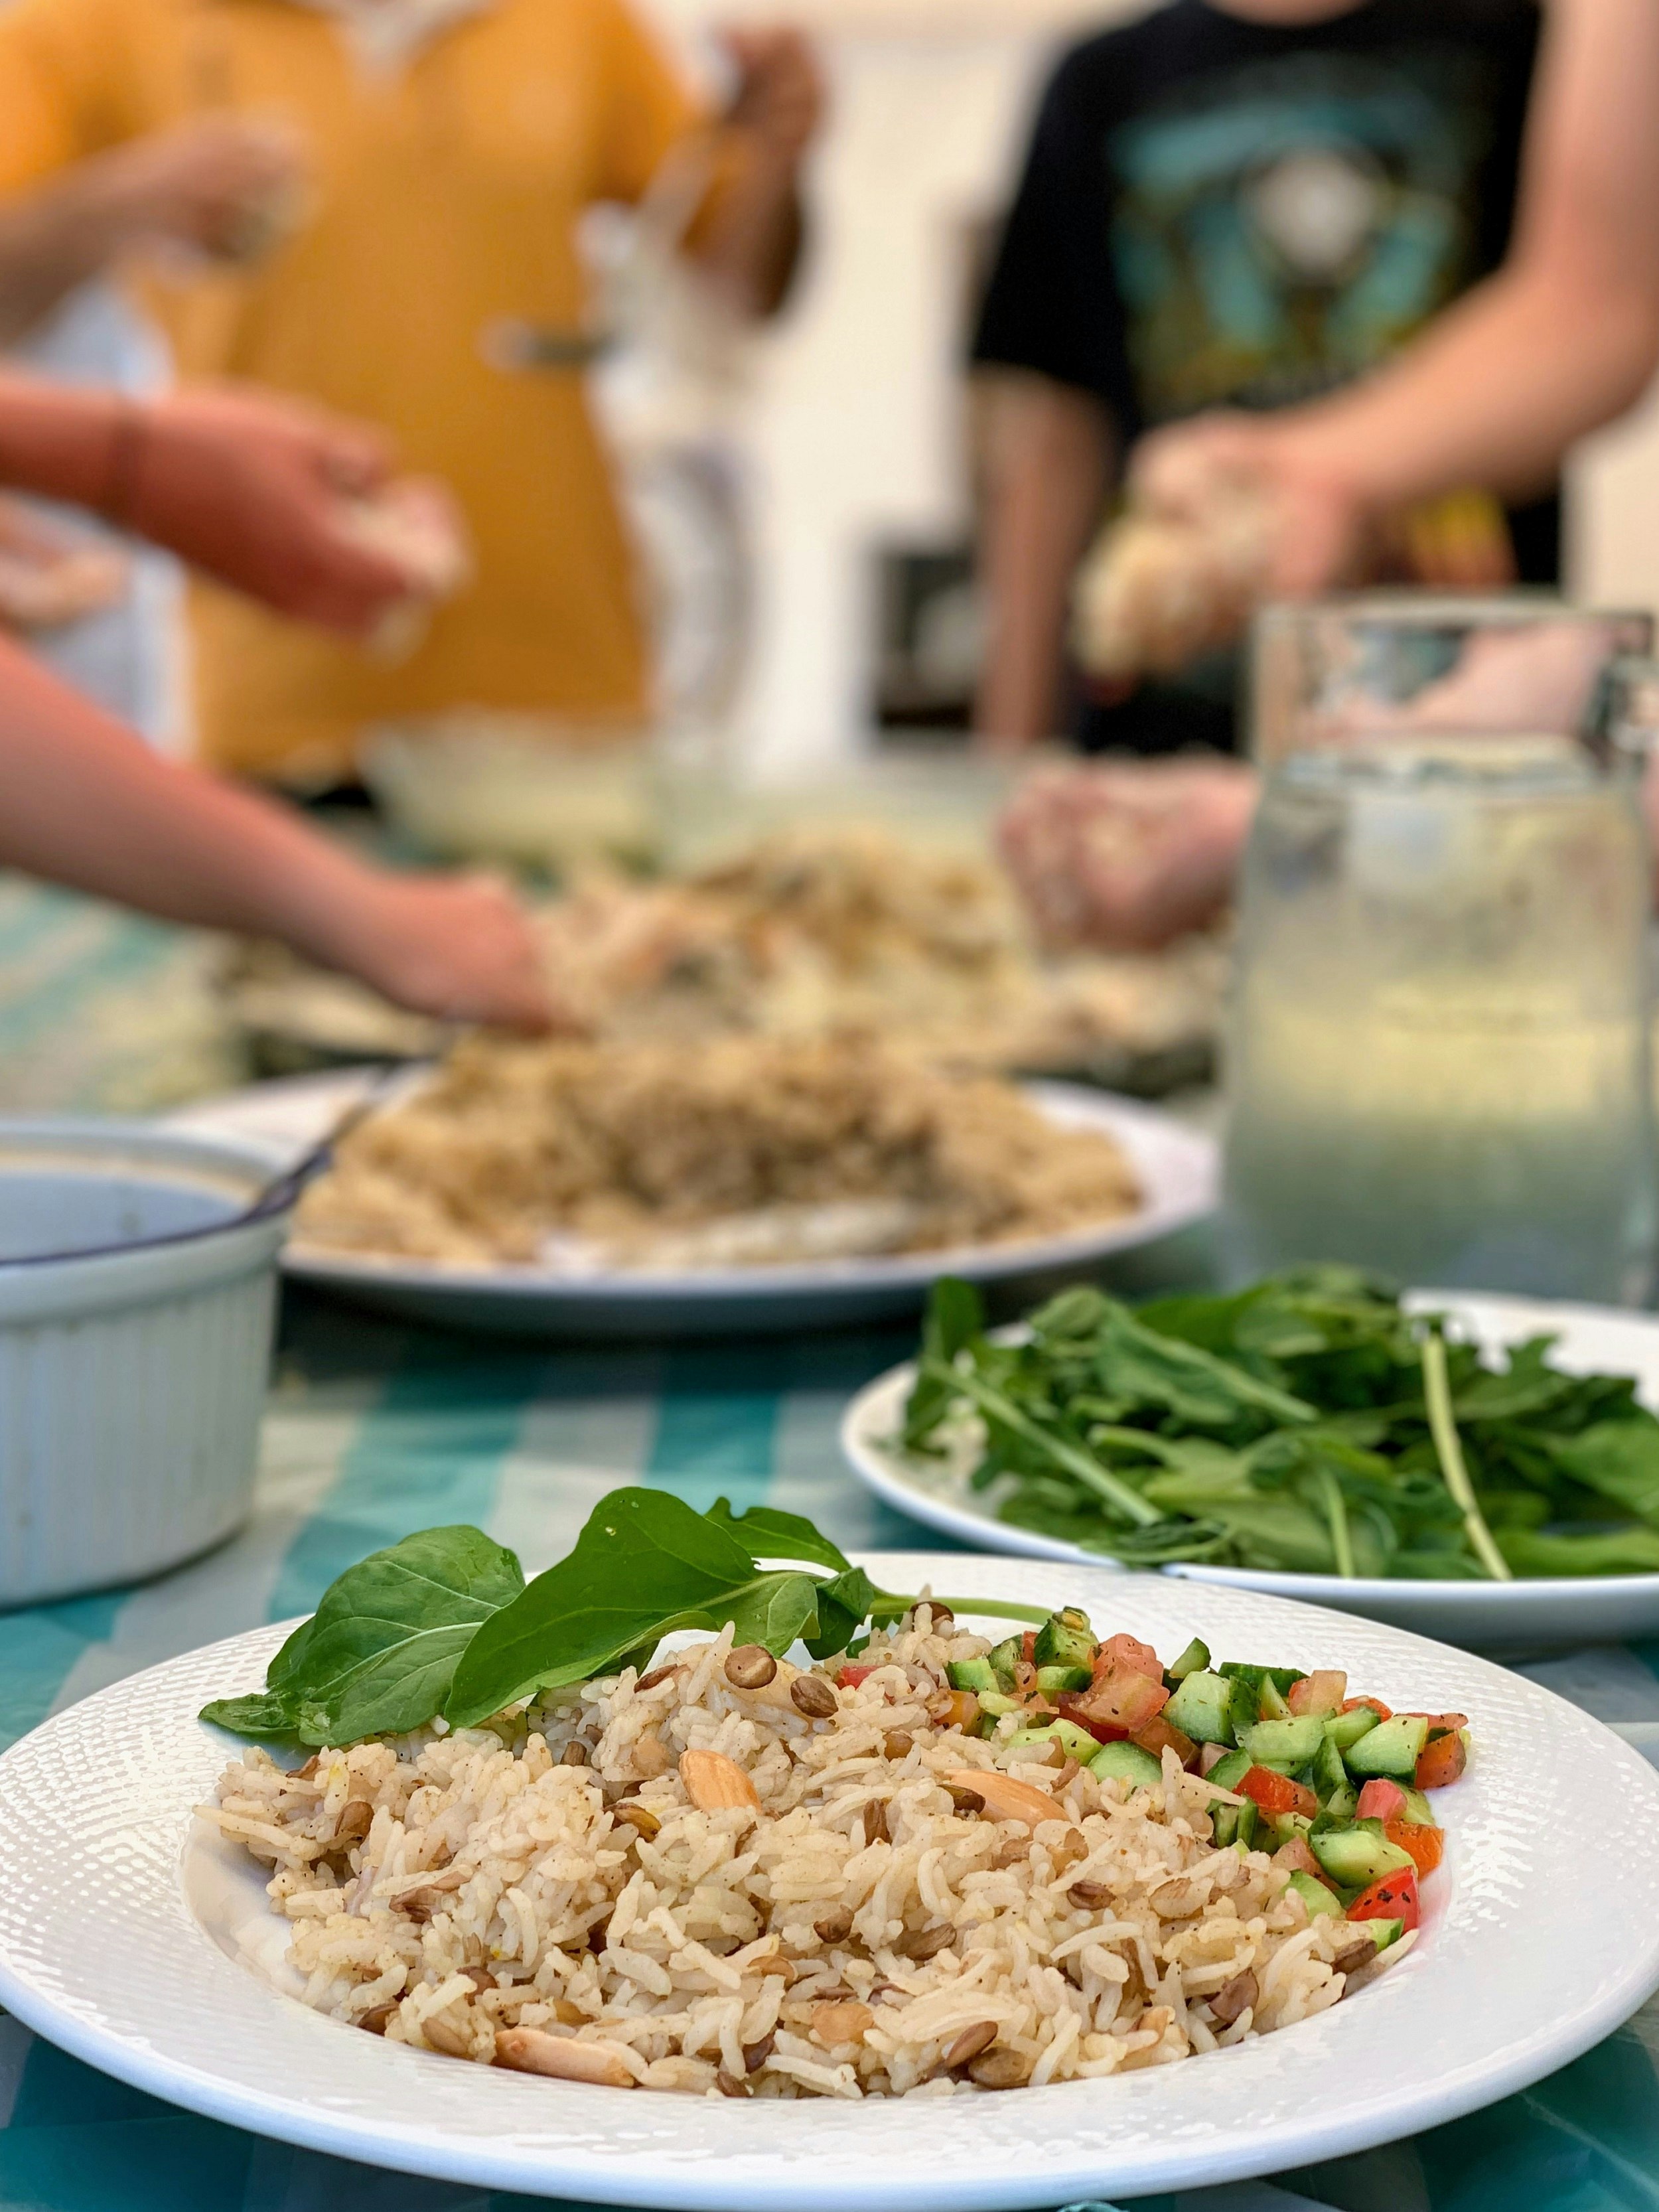 A shot looking down a table at plates filled with a rice and lentil dish; the plate nearest the camera is in focus, while all the others are blurred (along with various people's arms extending over the table at the far end).